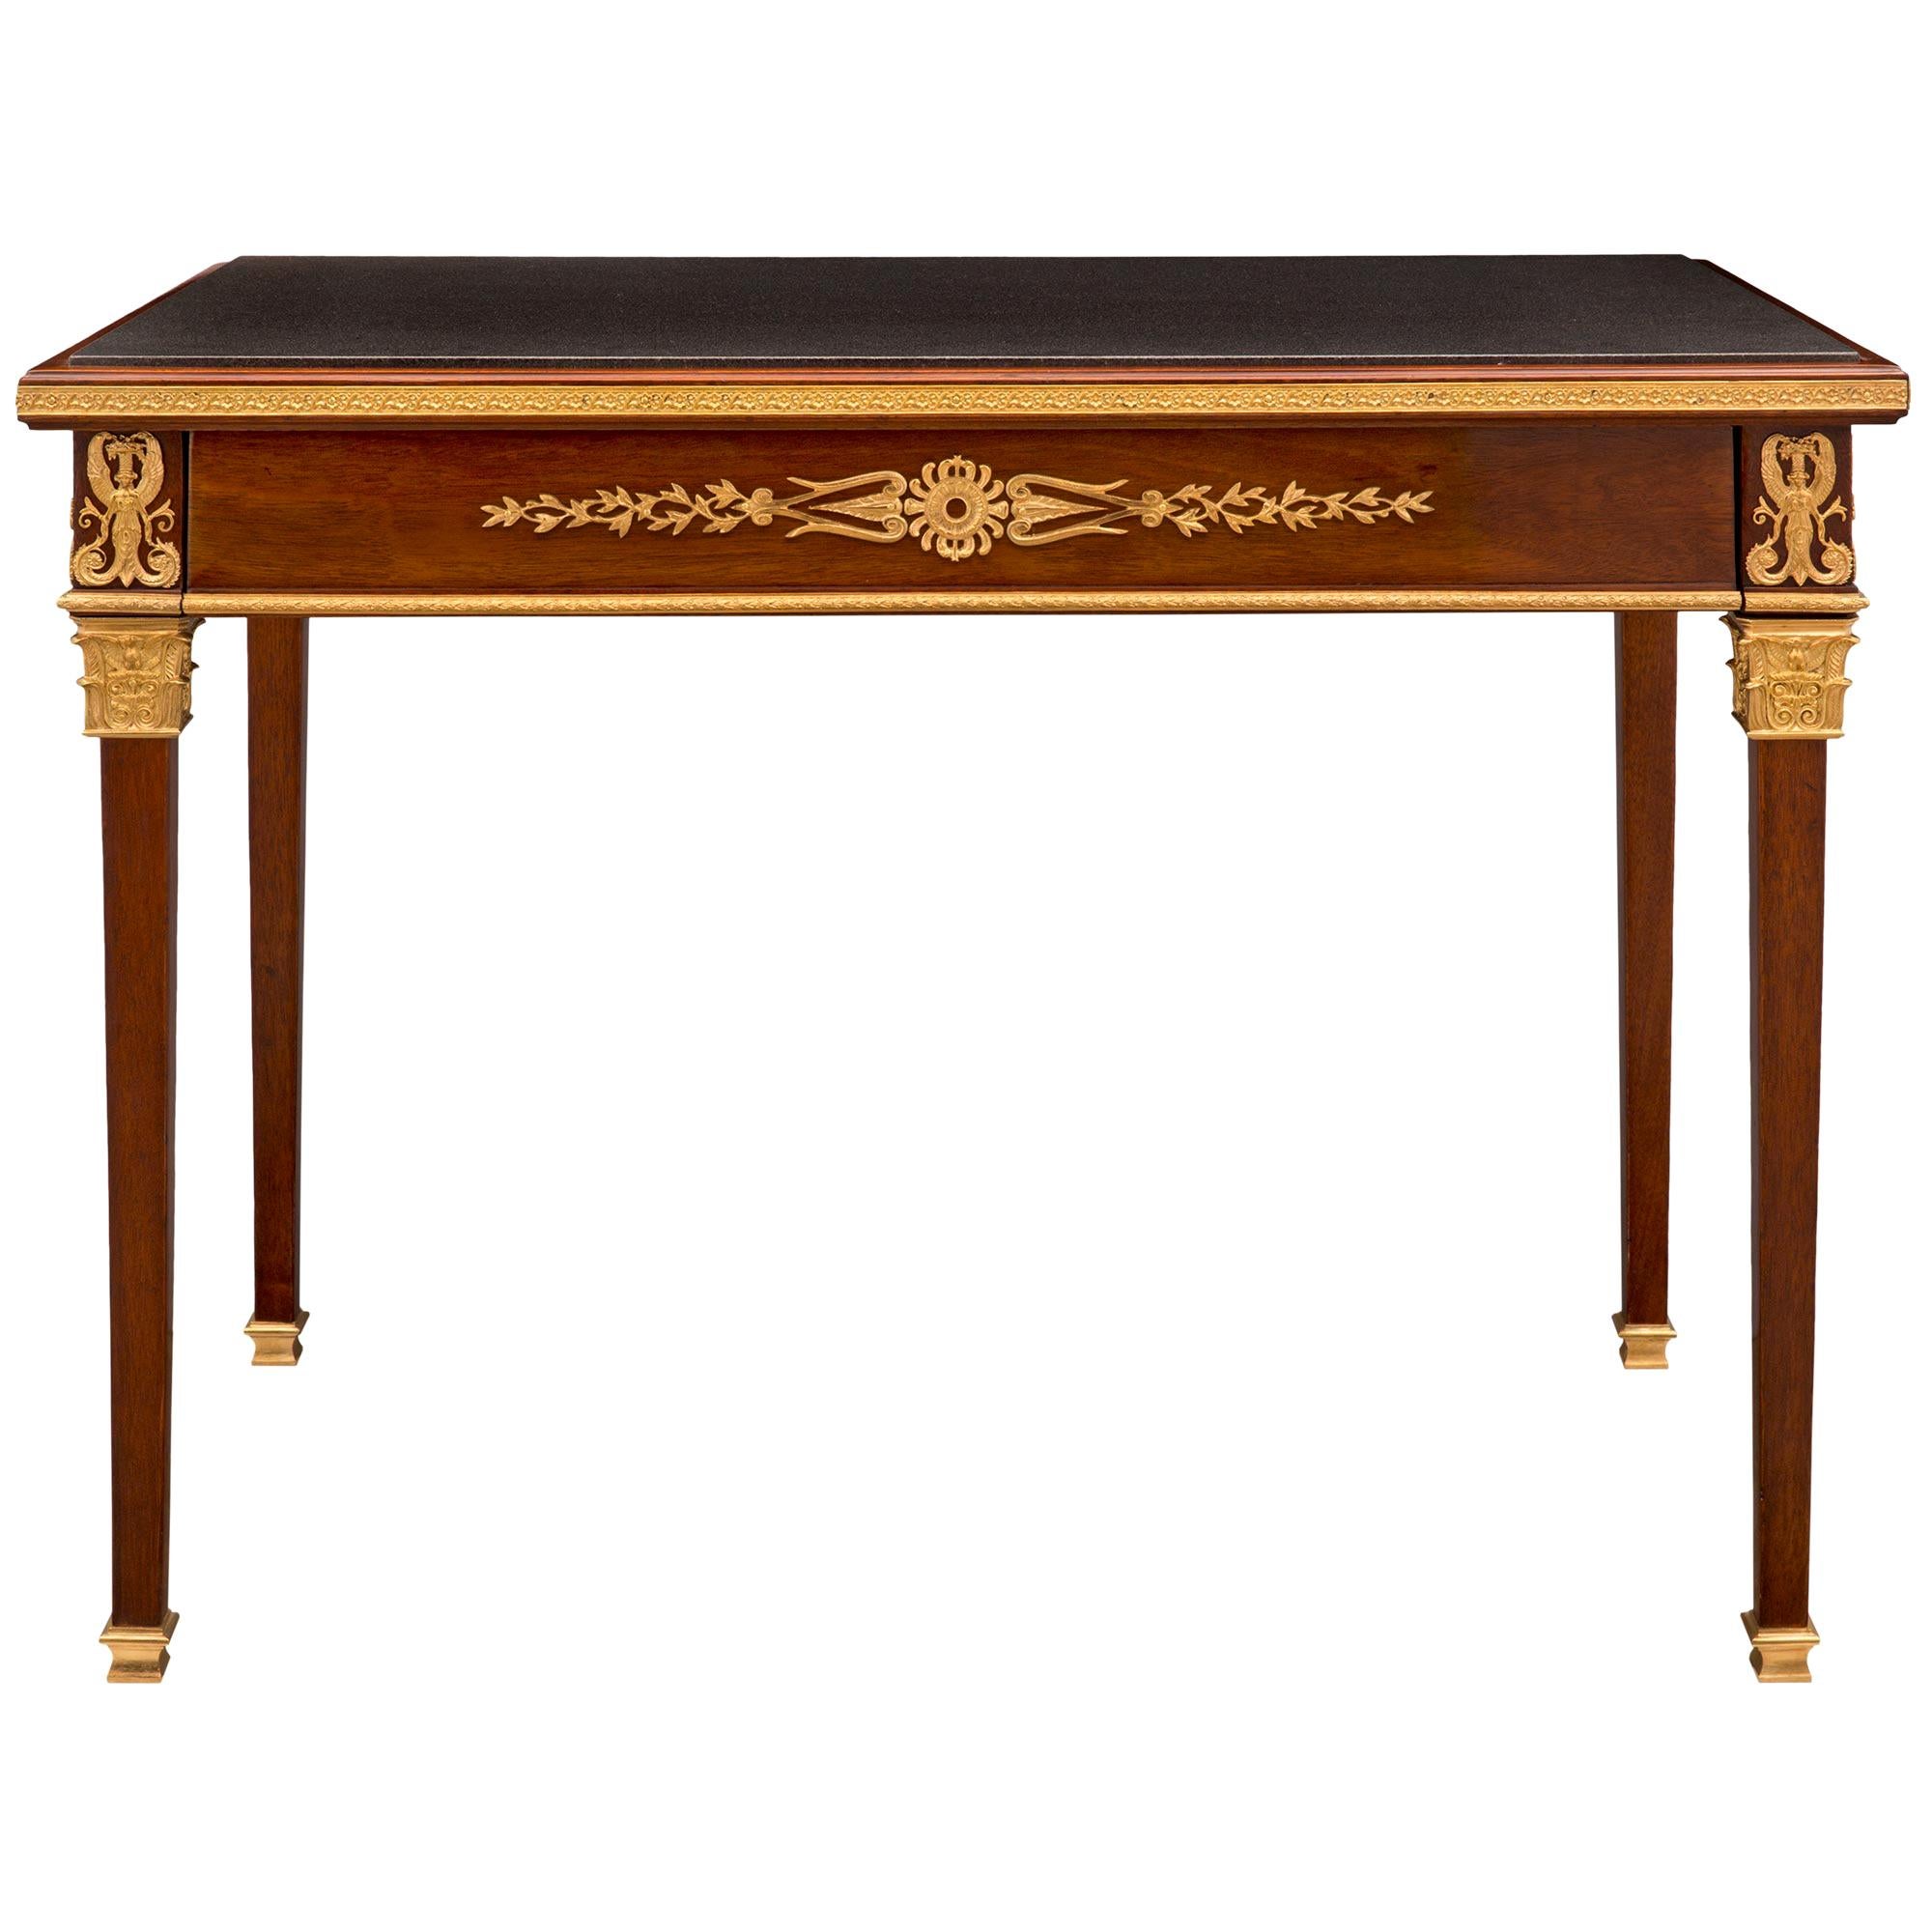 French 19th Century Neoclassical Style Mahogany, Ormolu and Slate Table/Desk For Sale